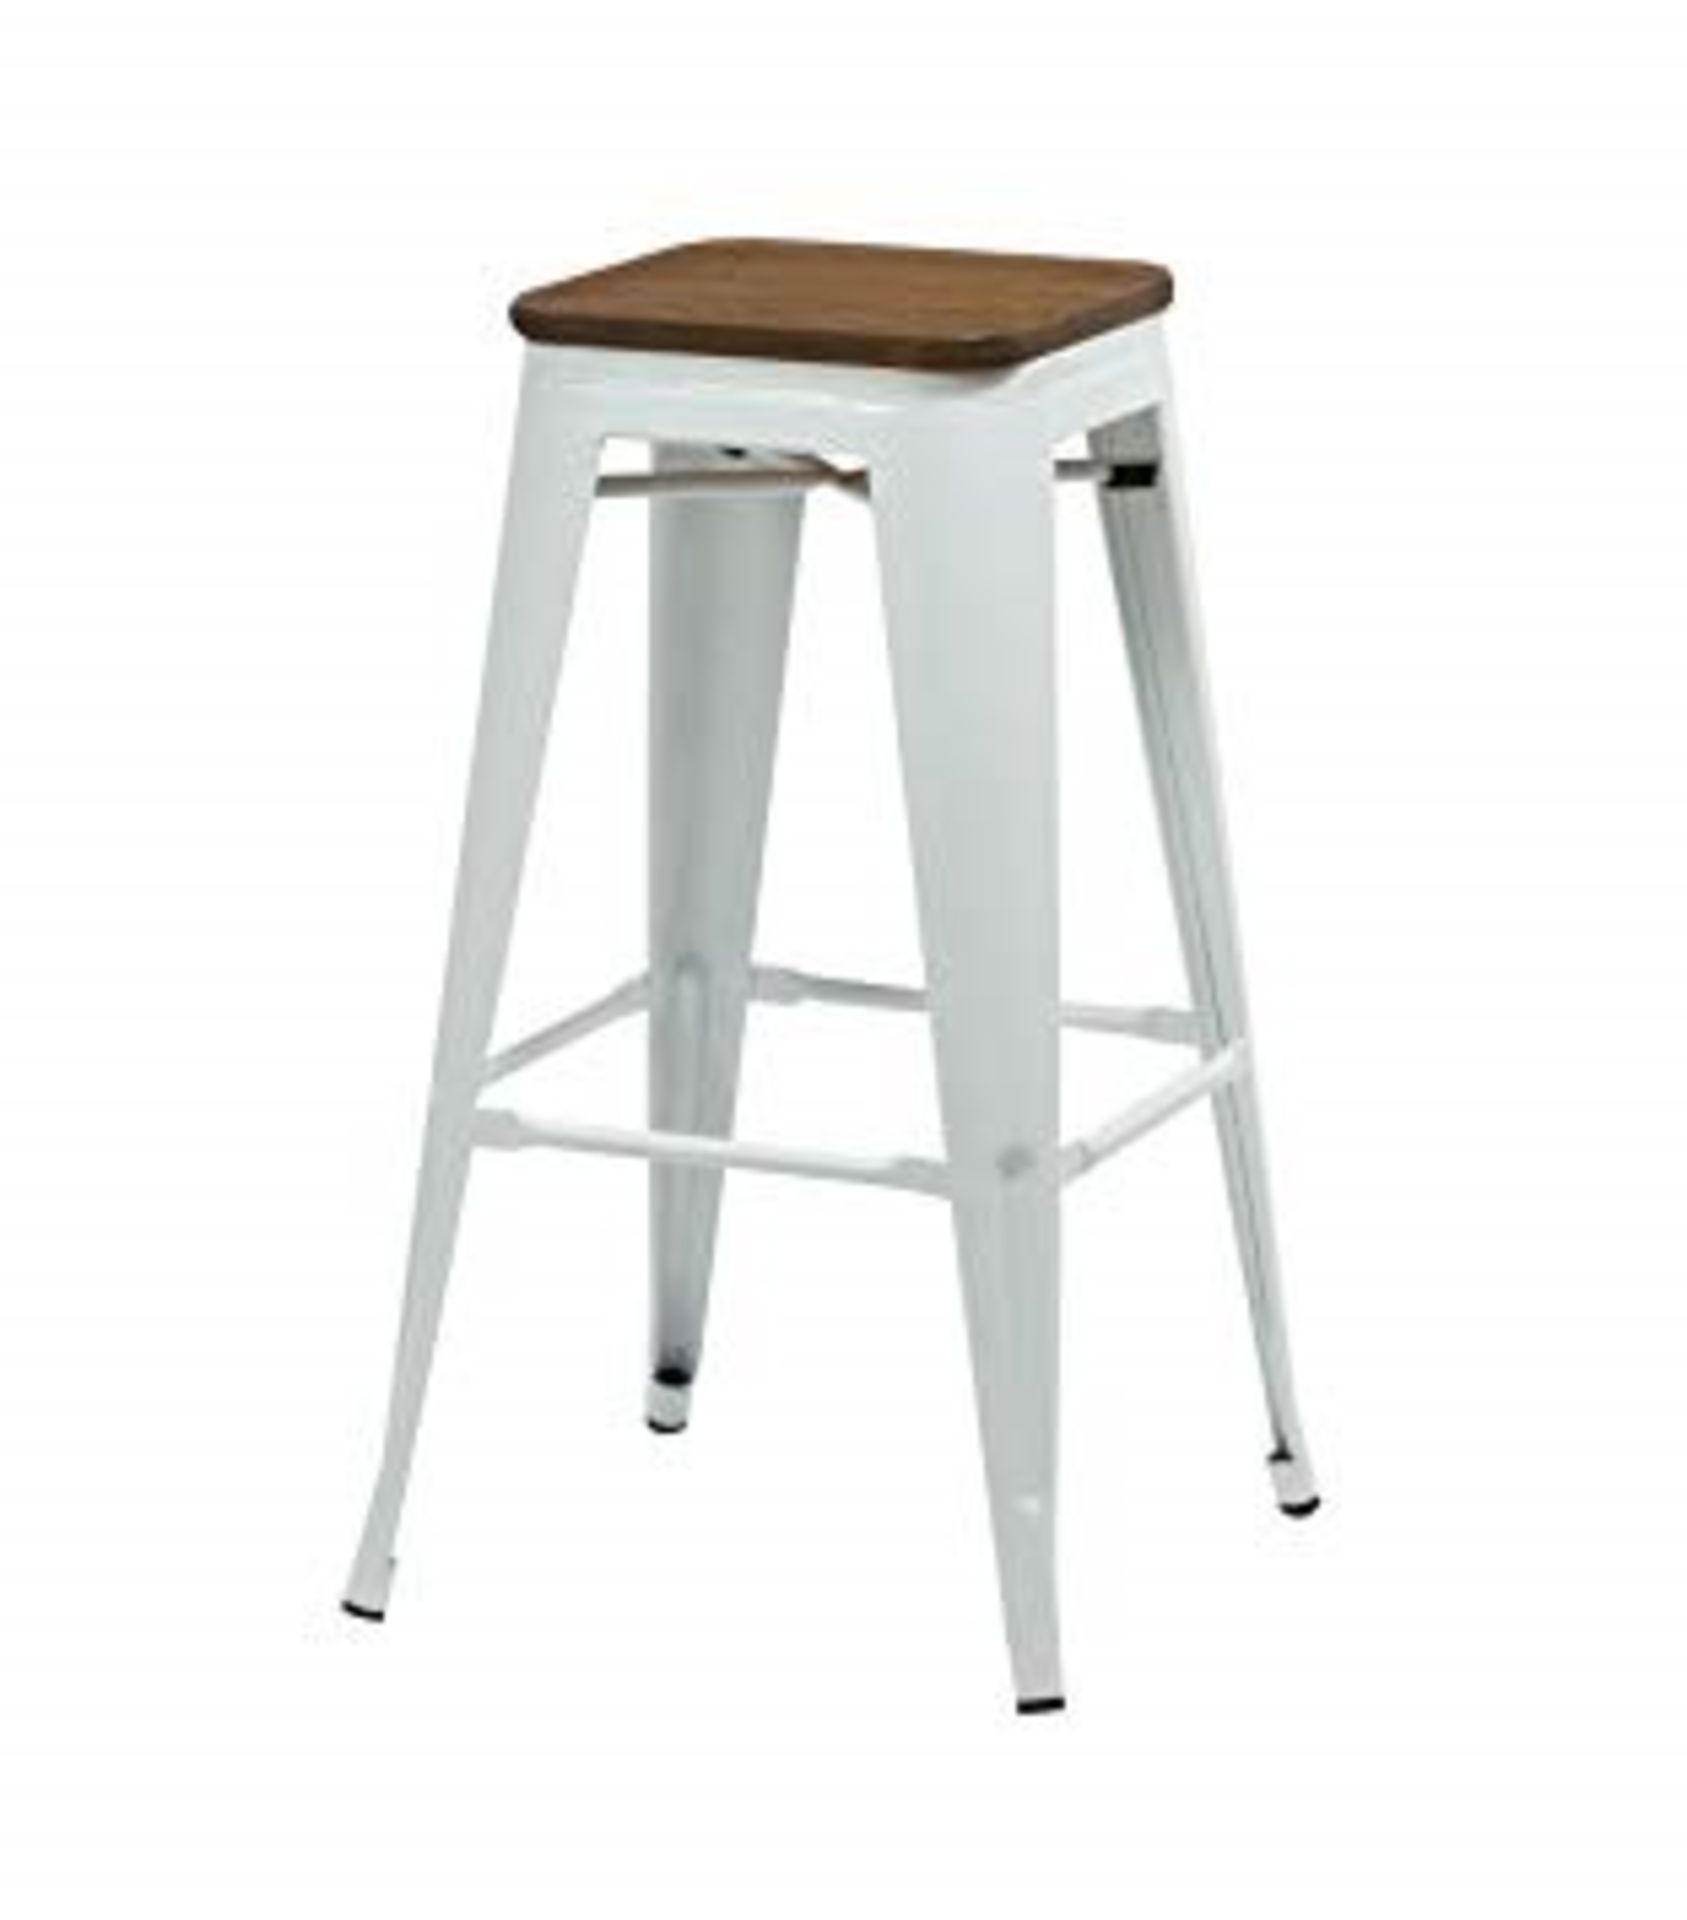 2 BOXED BIRLEA DOWNTOWN METAL STOOLS IN WHITE